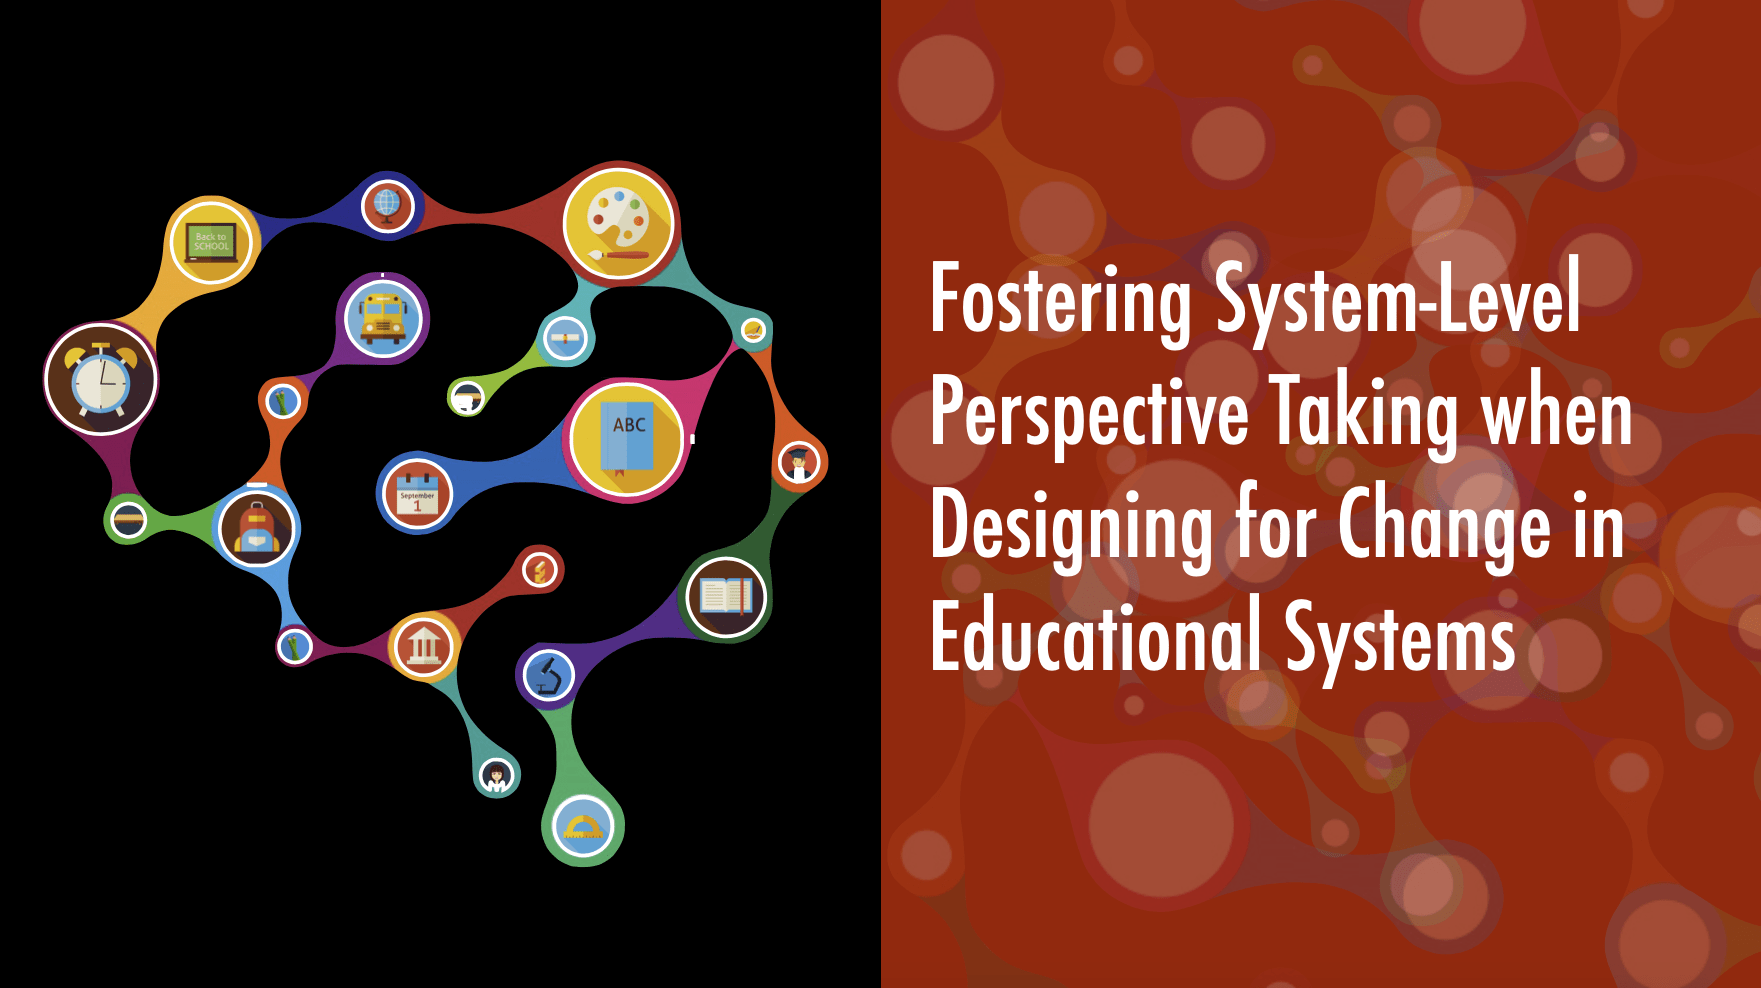 Systems level change in education